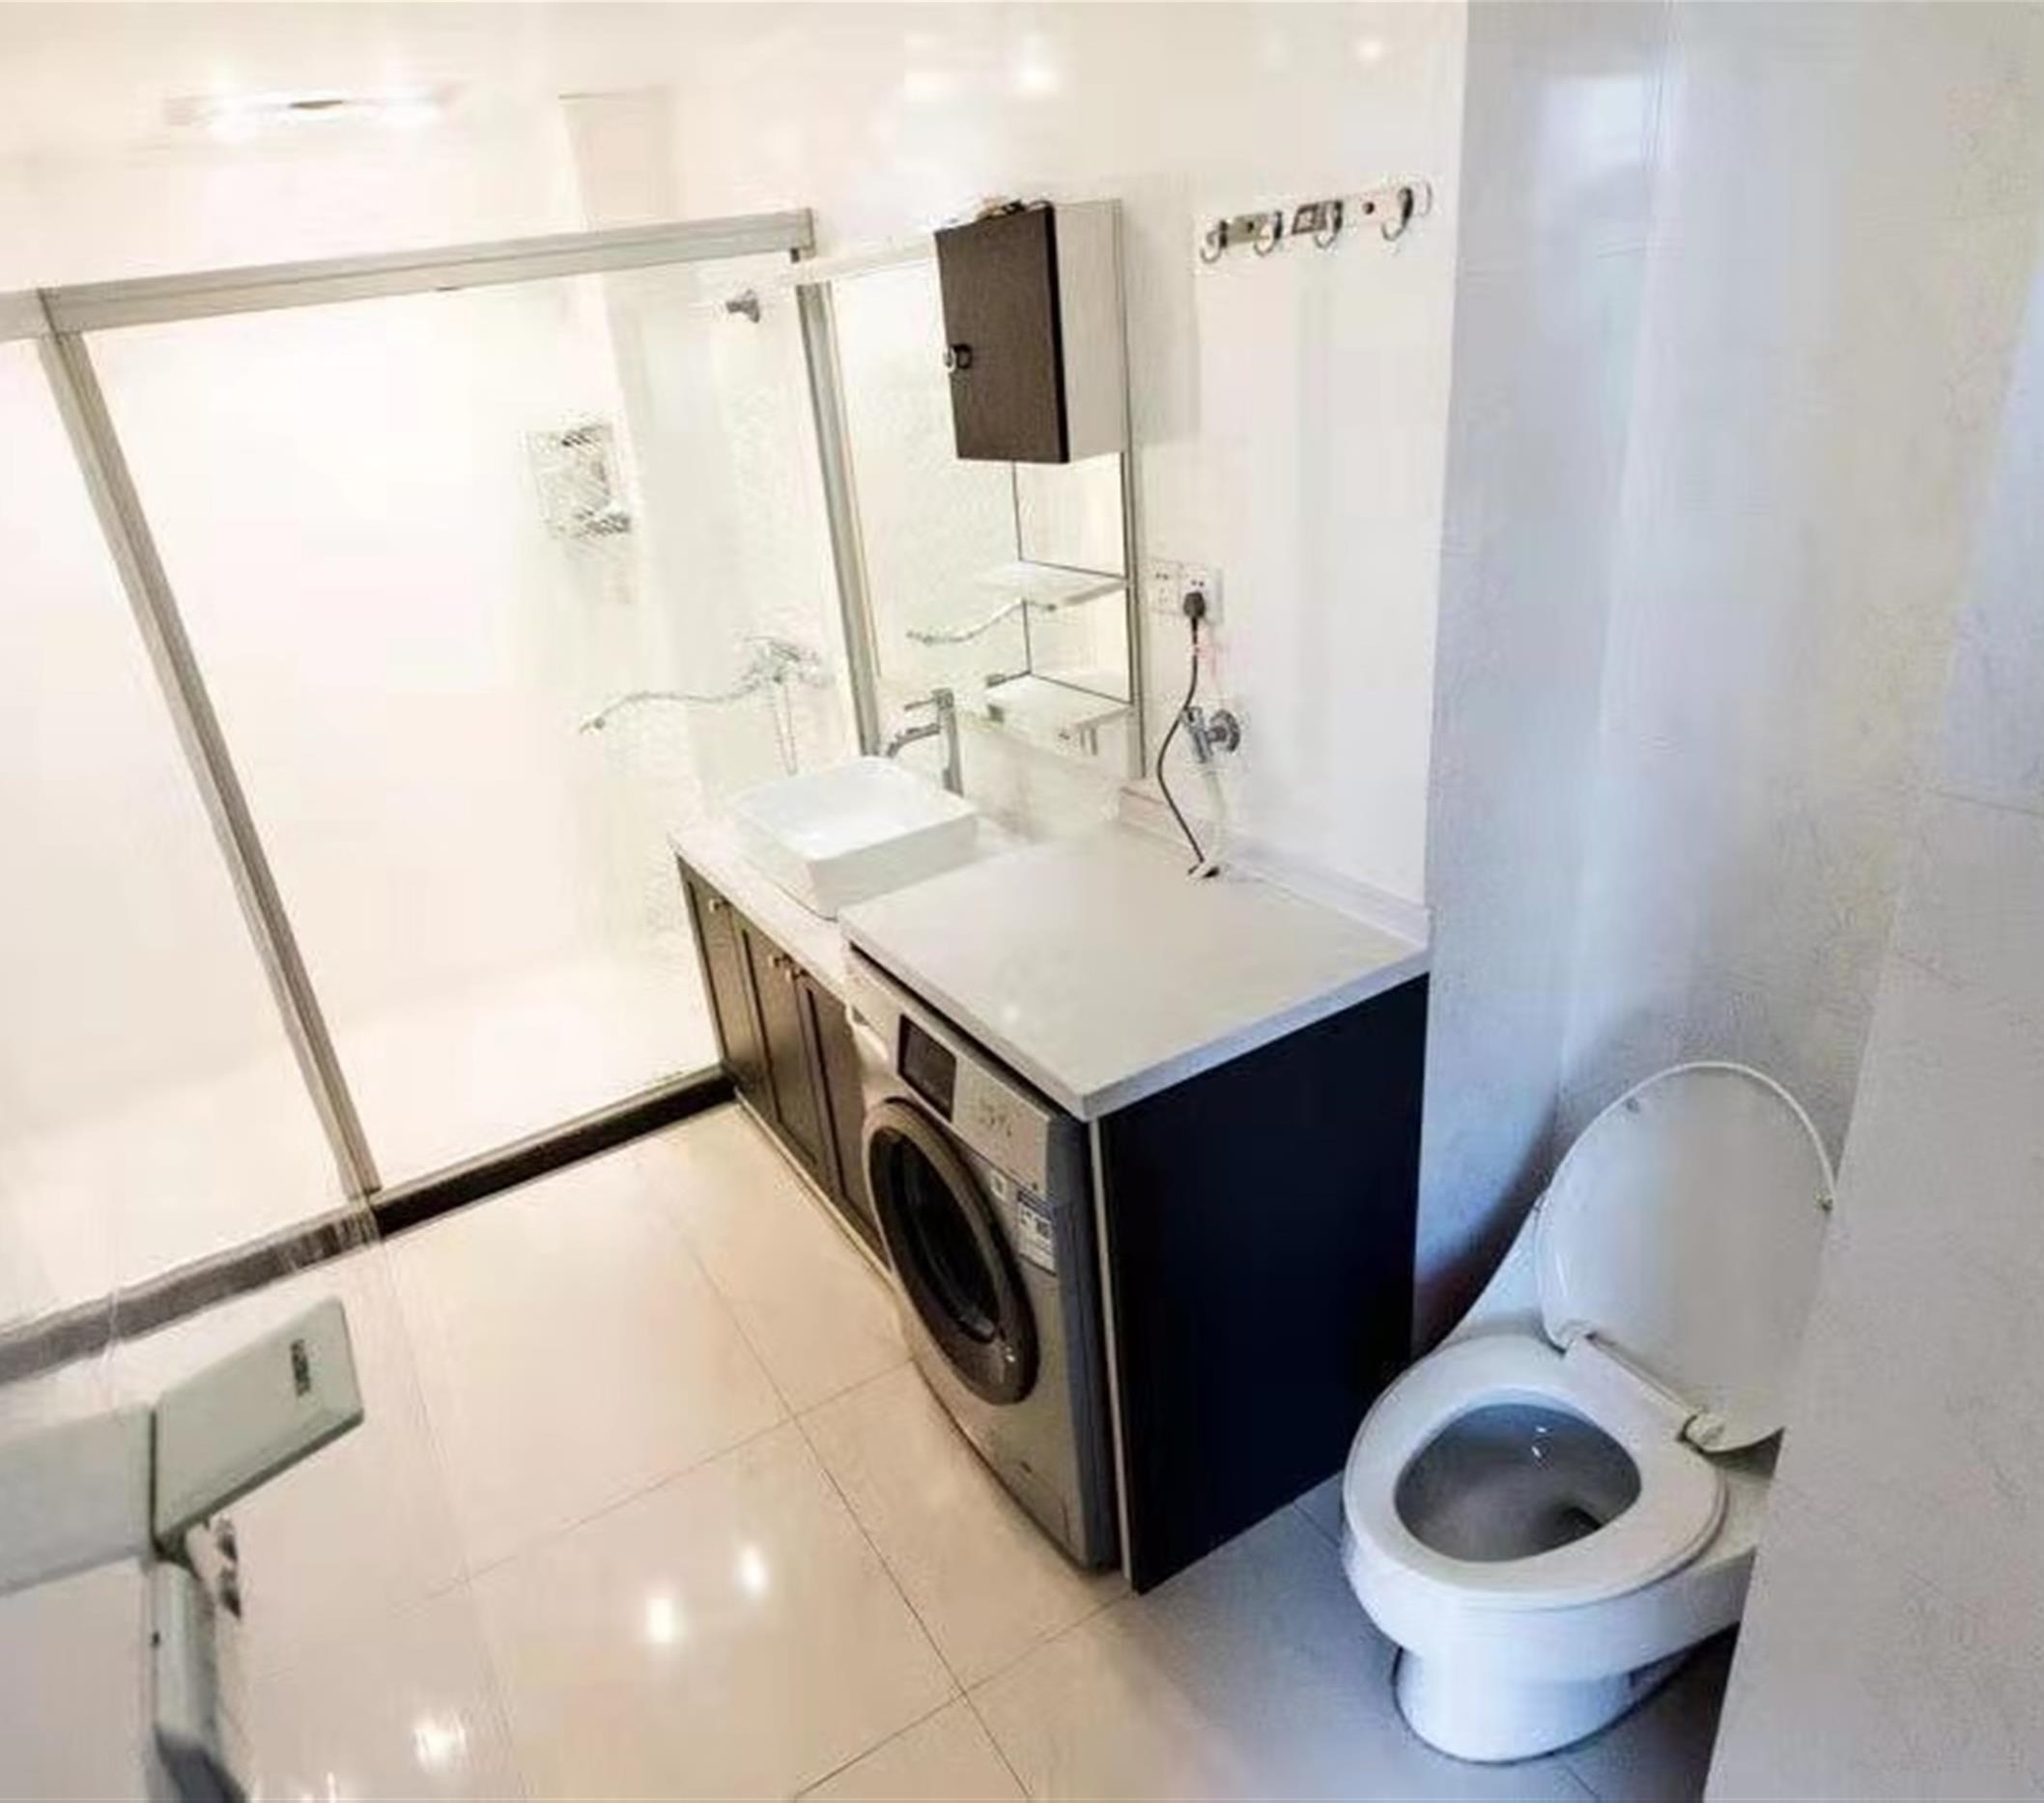 clean bathroom Large 2BR Apartment nr LN 2/3/4 in Shanghai’s Xinhua Road Area for Rent